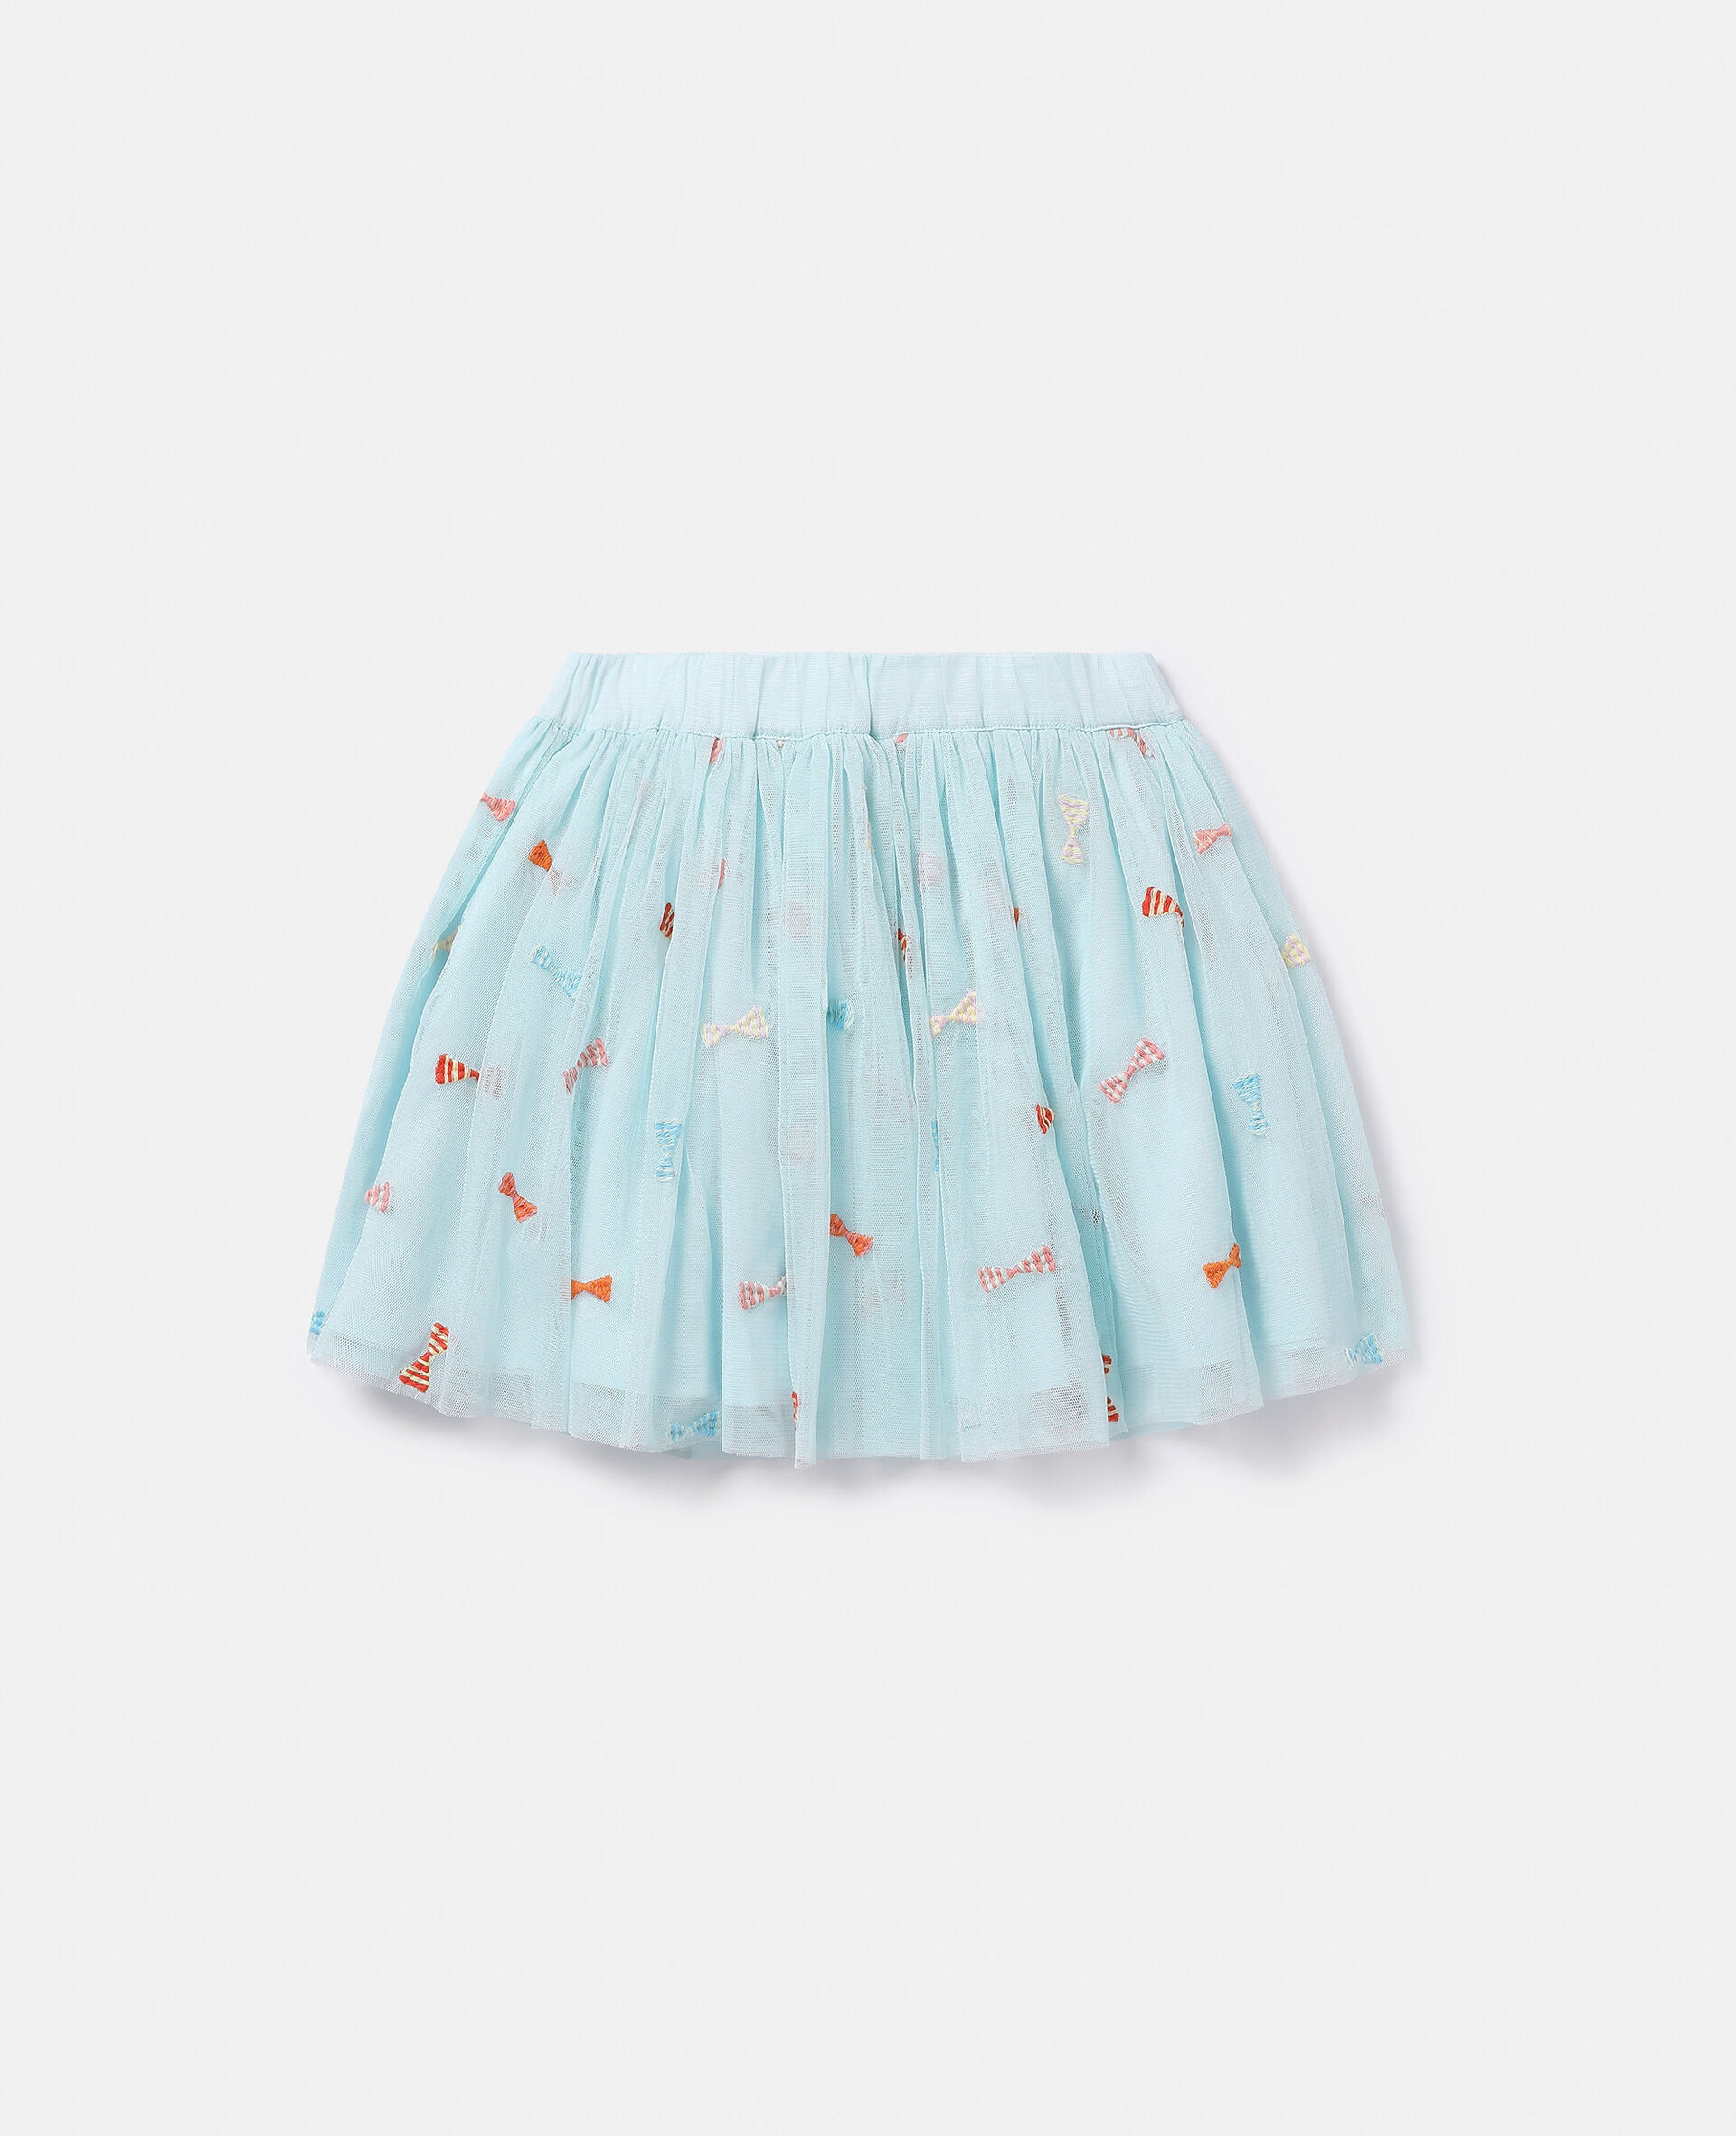 Striped Bow Embroidery Tutu Skirt-Blue-large image number 0